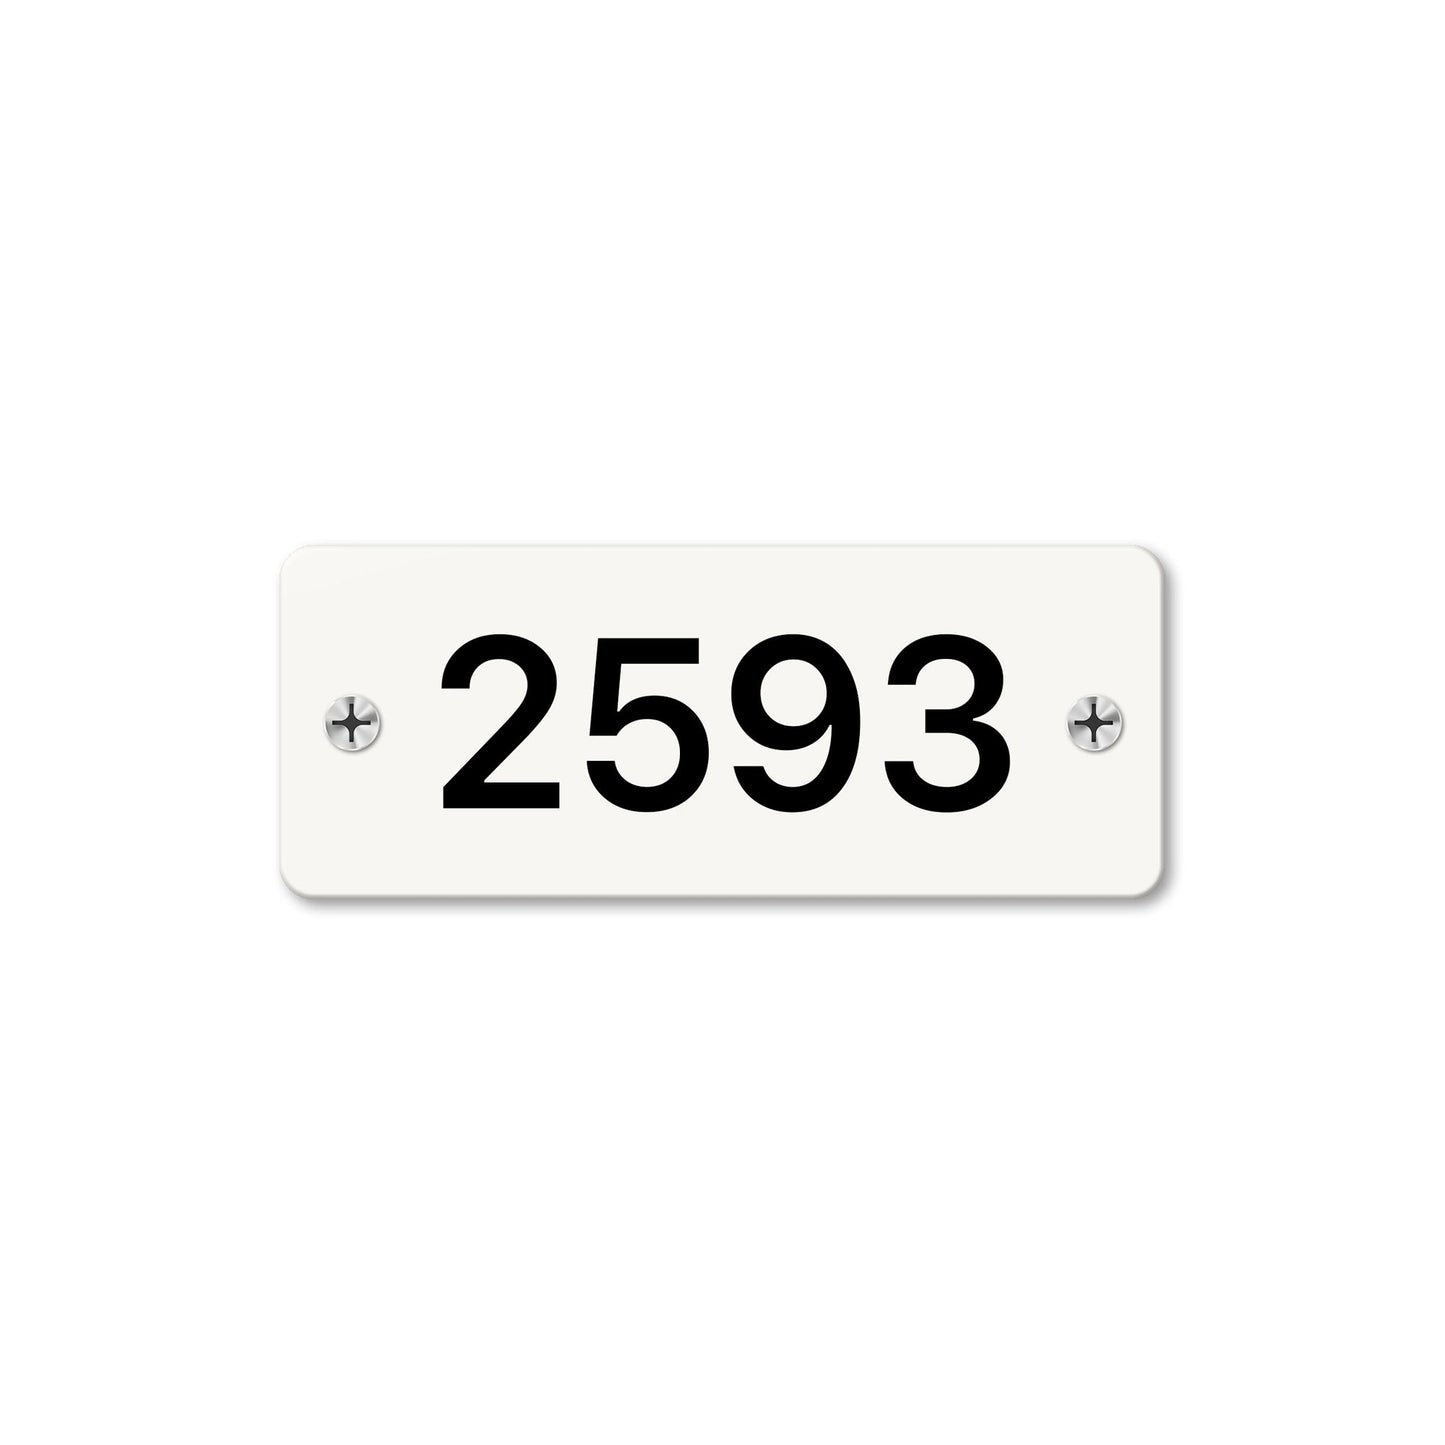 Numeral 2593